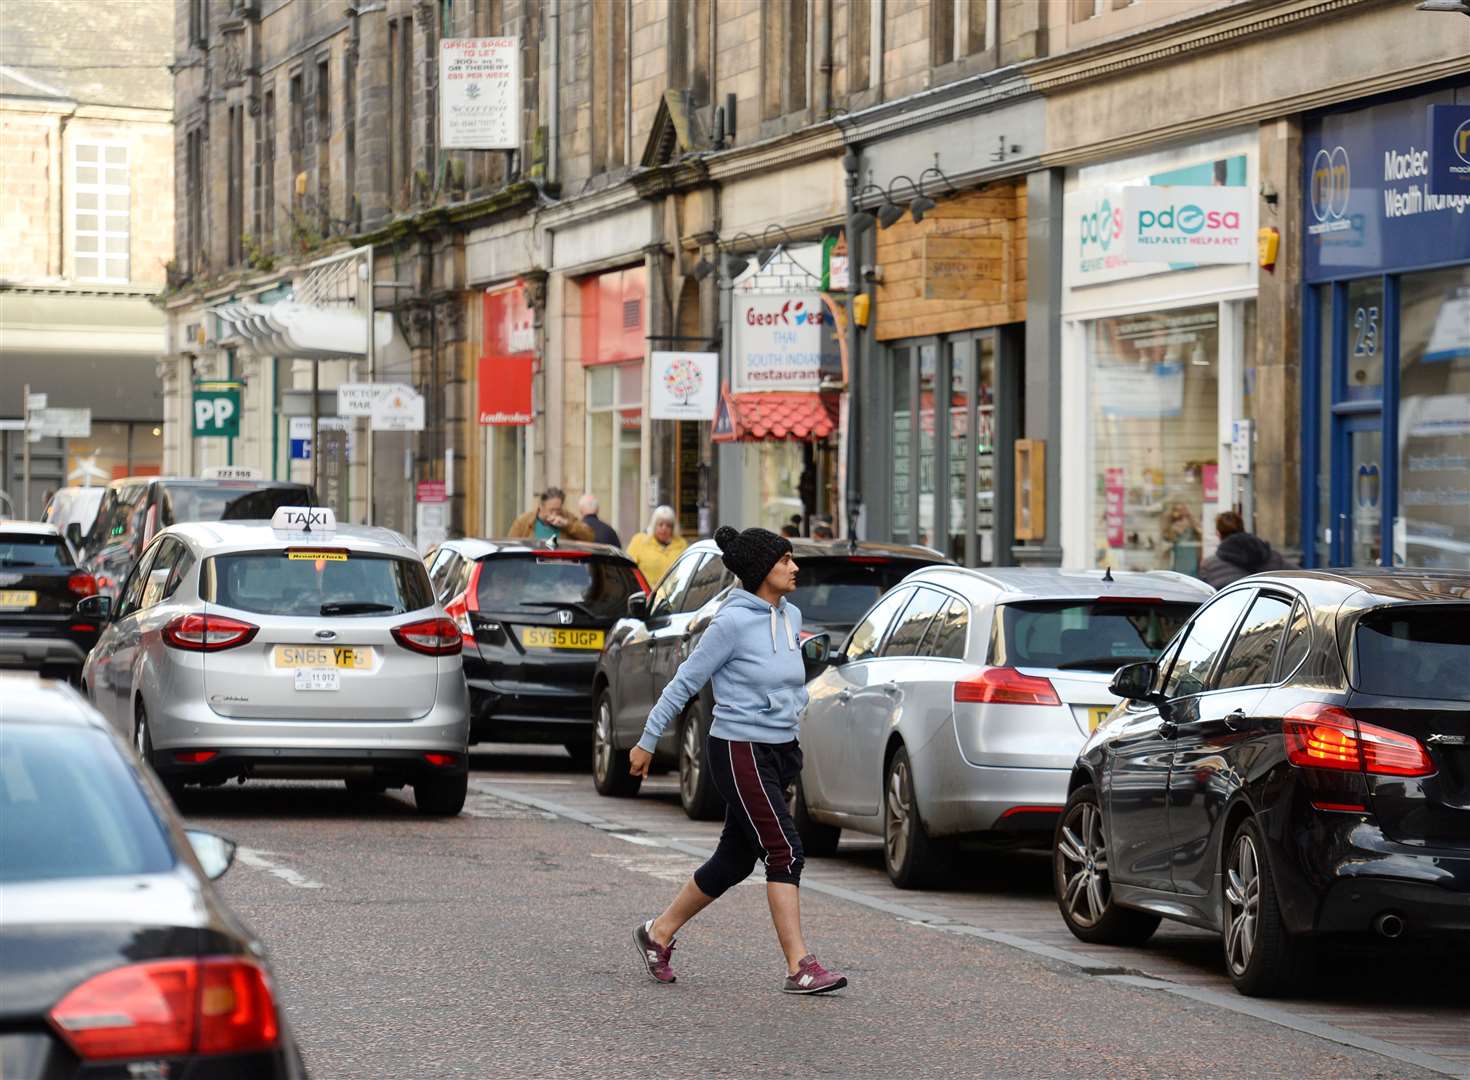 Would Queensgate be improved by pedestrianisation?